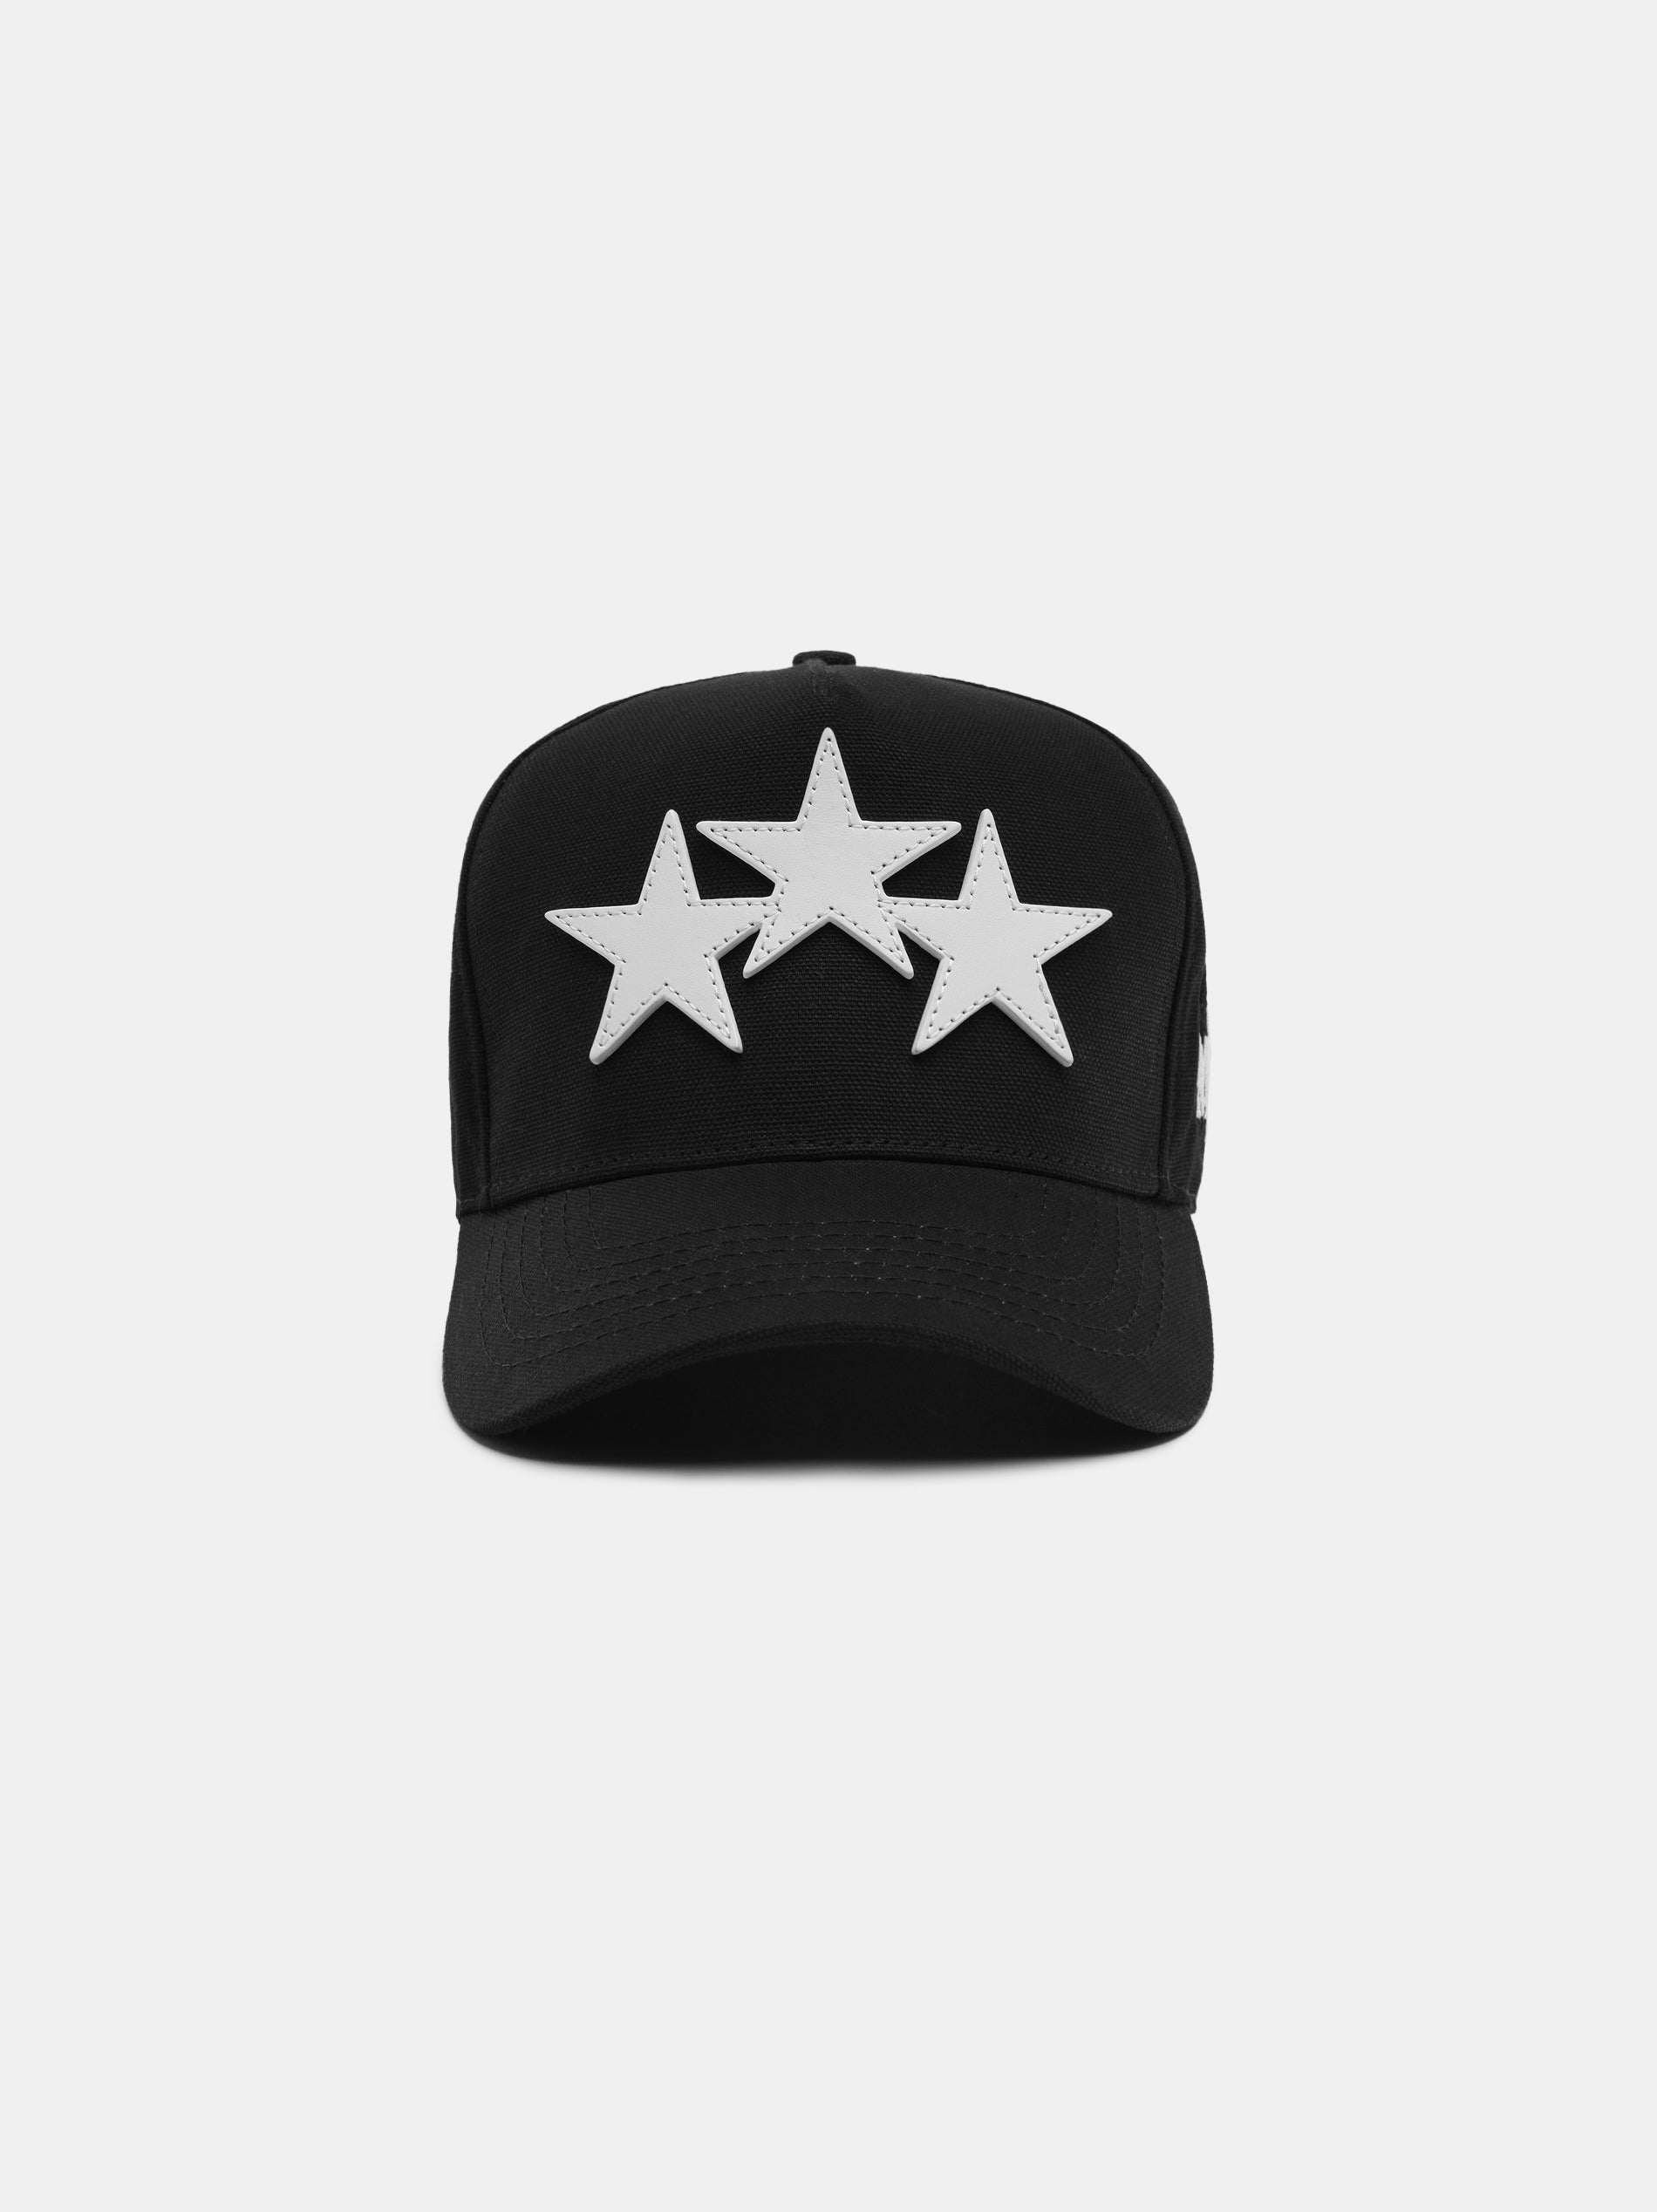 Product THREE STAR STAGGERED AMIRI FULL CANVAS HAT - Black White featured image